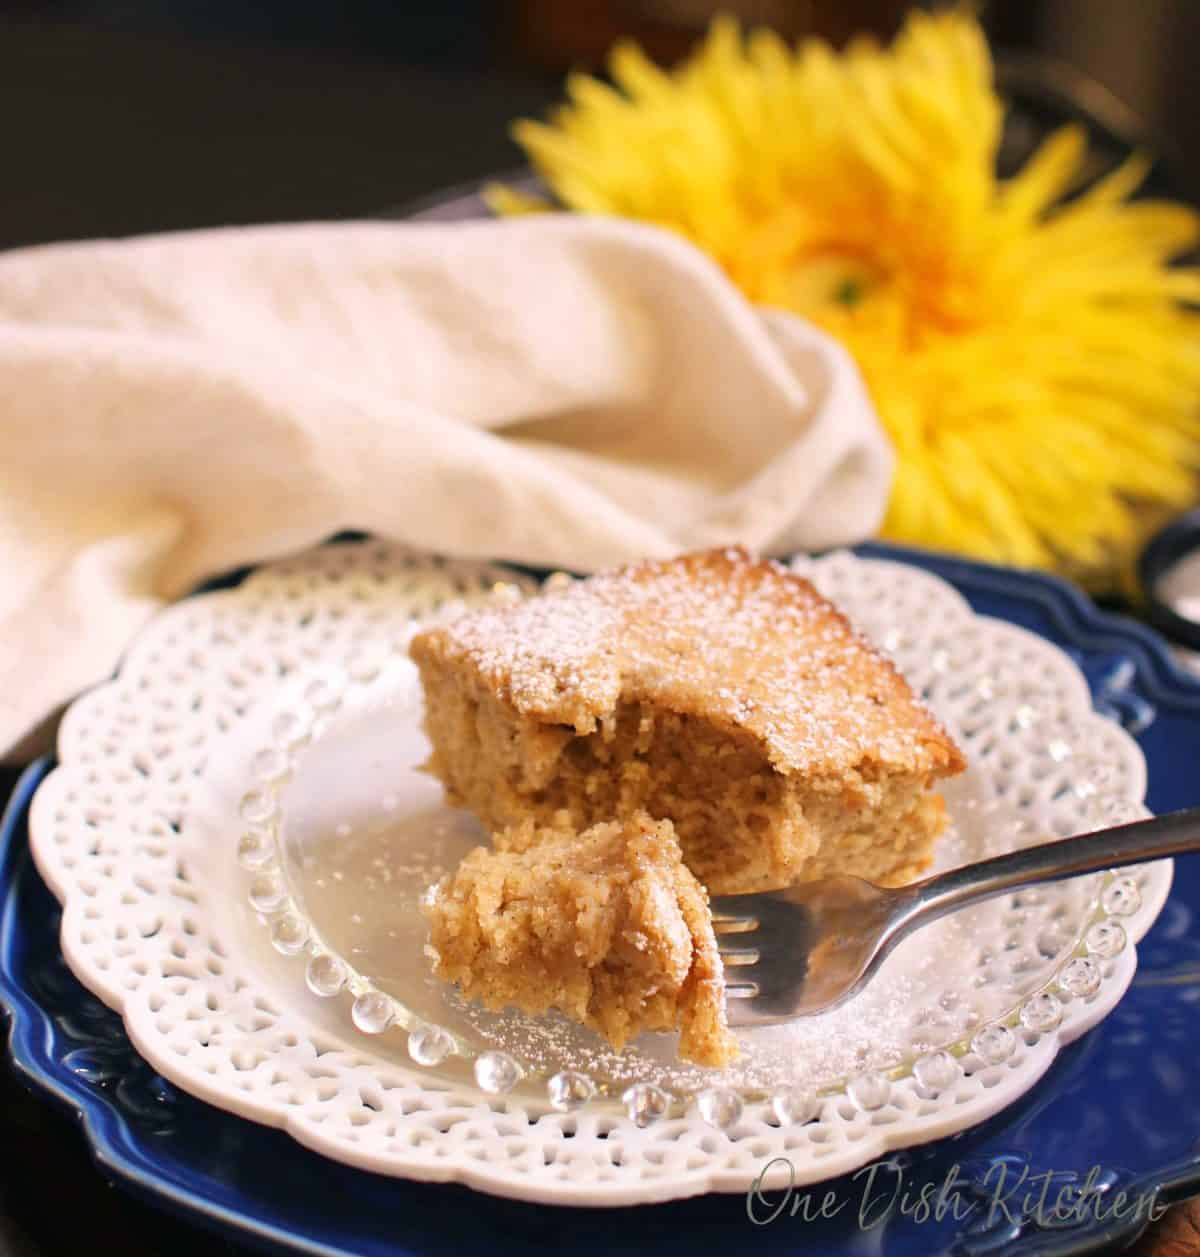 A square piece of spice cake dusted with powdered sugar on a small plate with a fork.